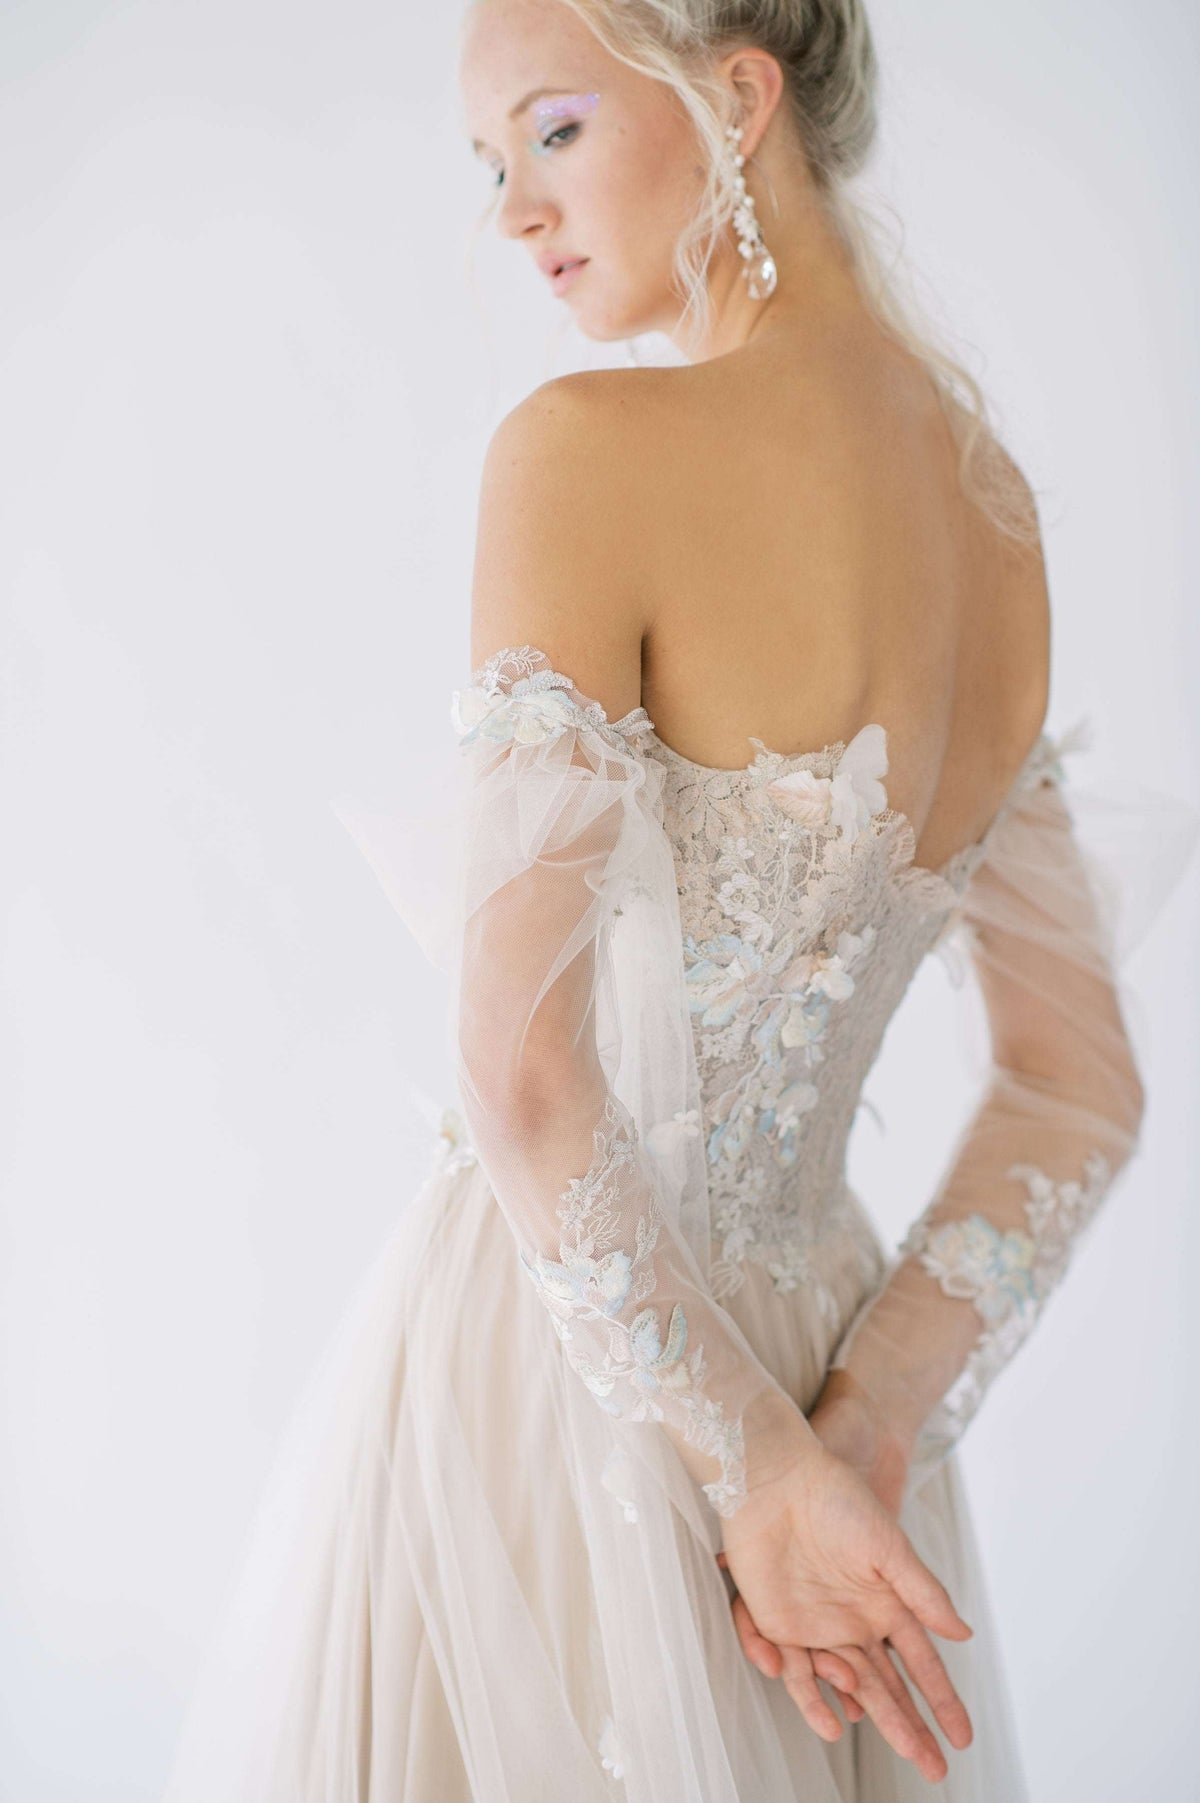 Timeless and romantic, whimsical blush silk and tulle wedding dress. Fairy tale floral applique. Off the shoulder, corset detailing. Custom made by Catherine Langlois, Canada